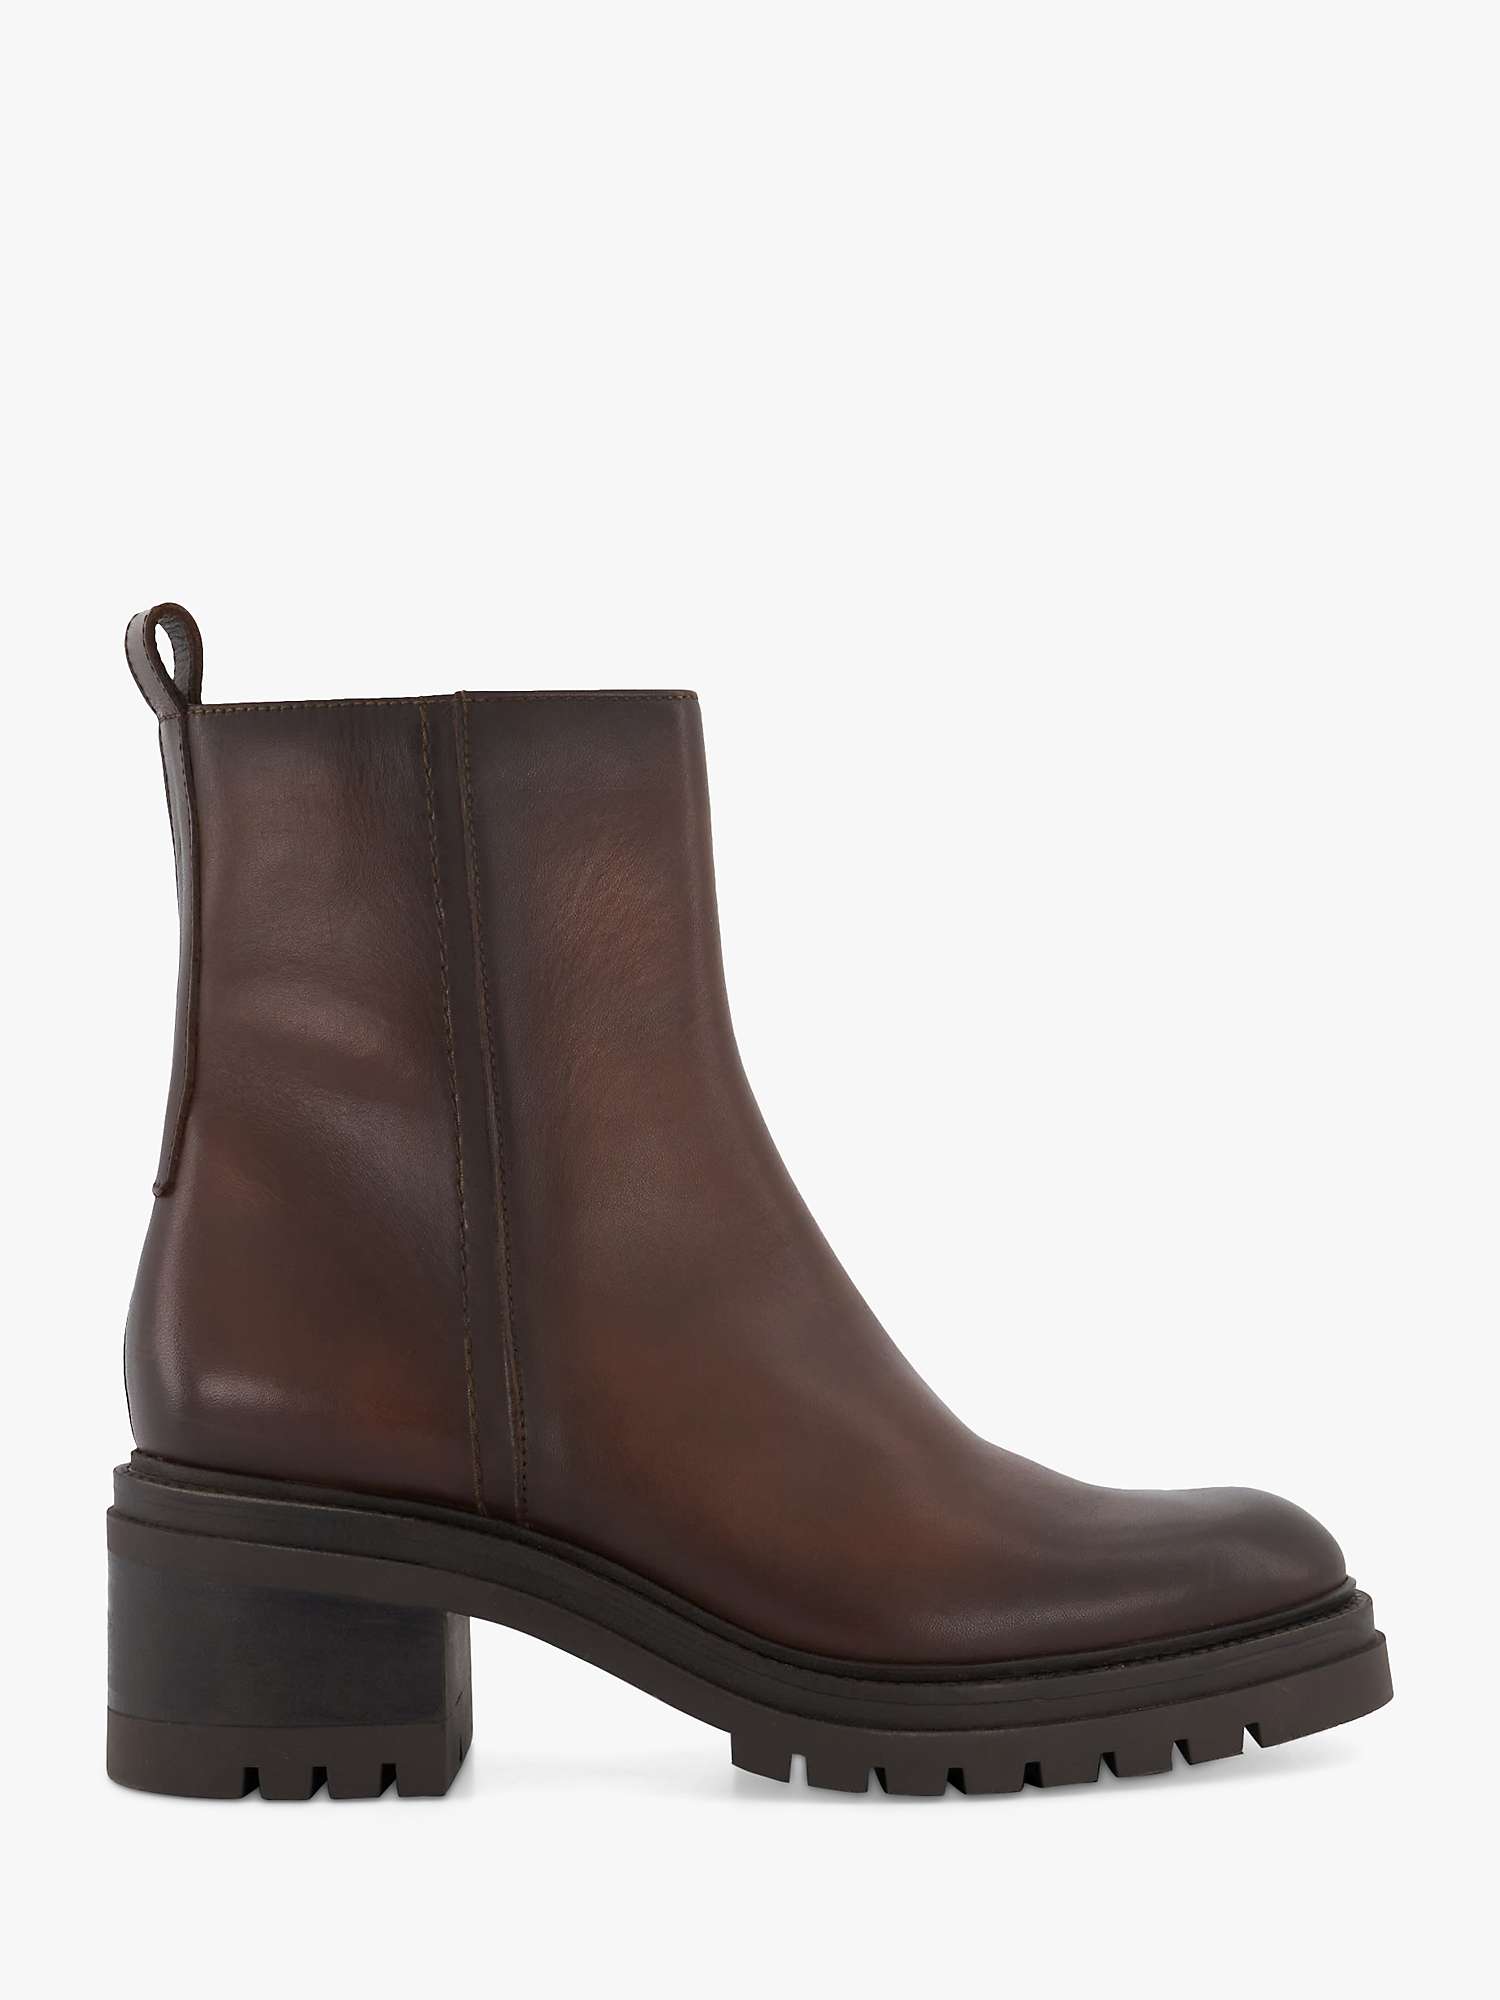 Buy Dune Possessive Leather Ankle Boots Online at johnlewis.com